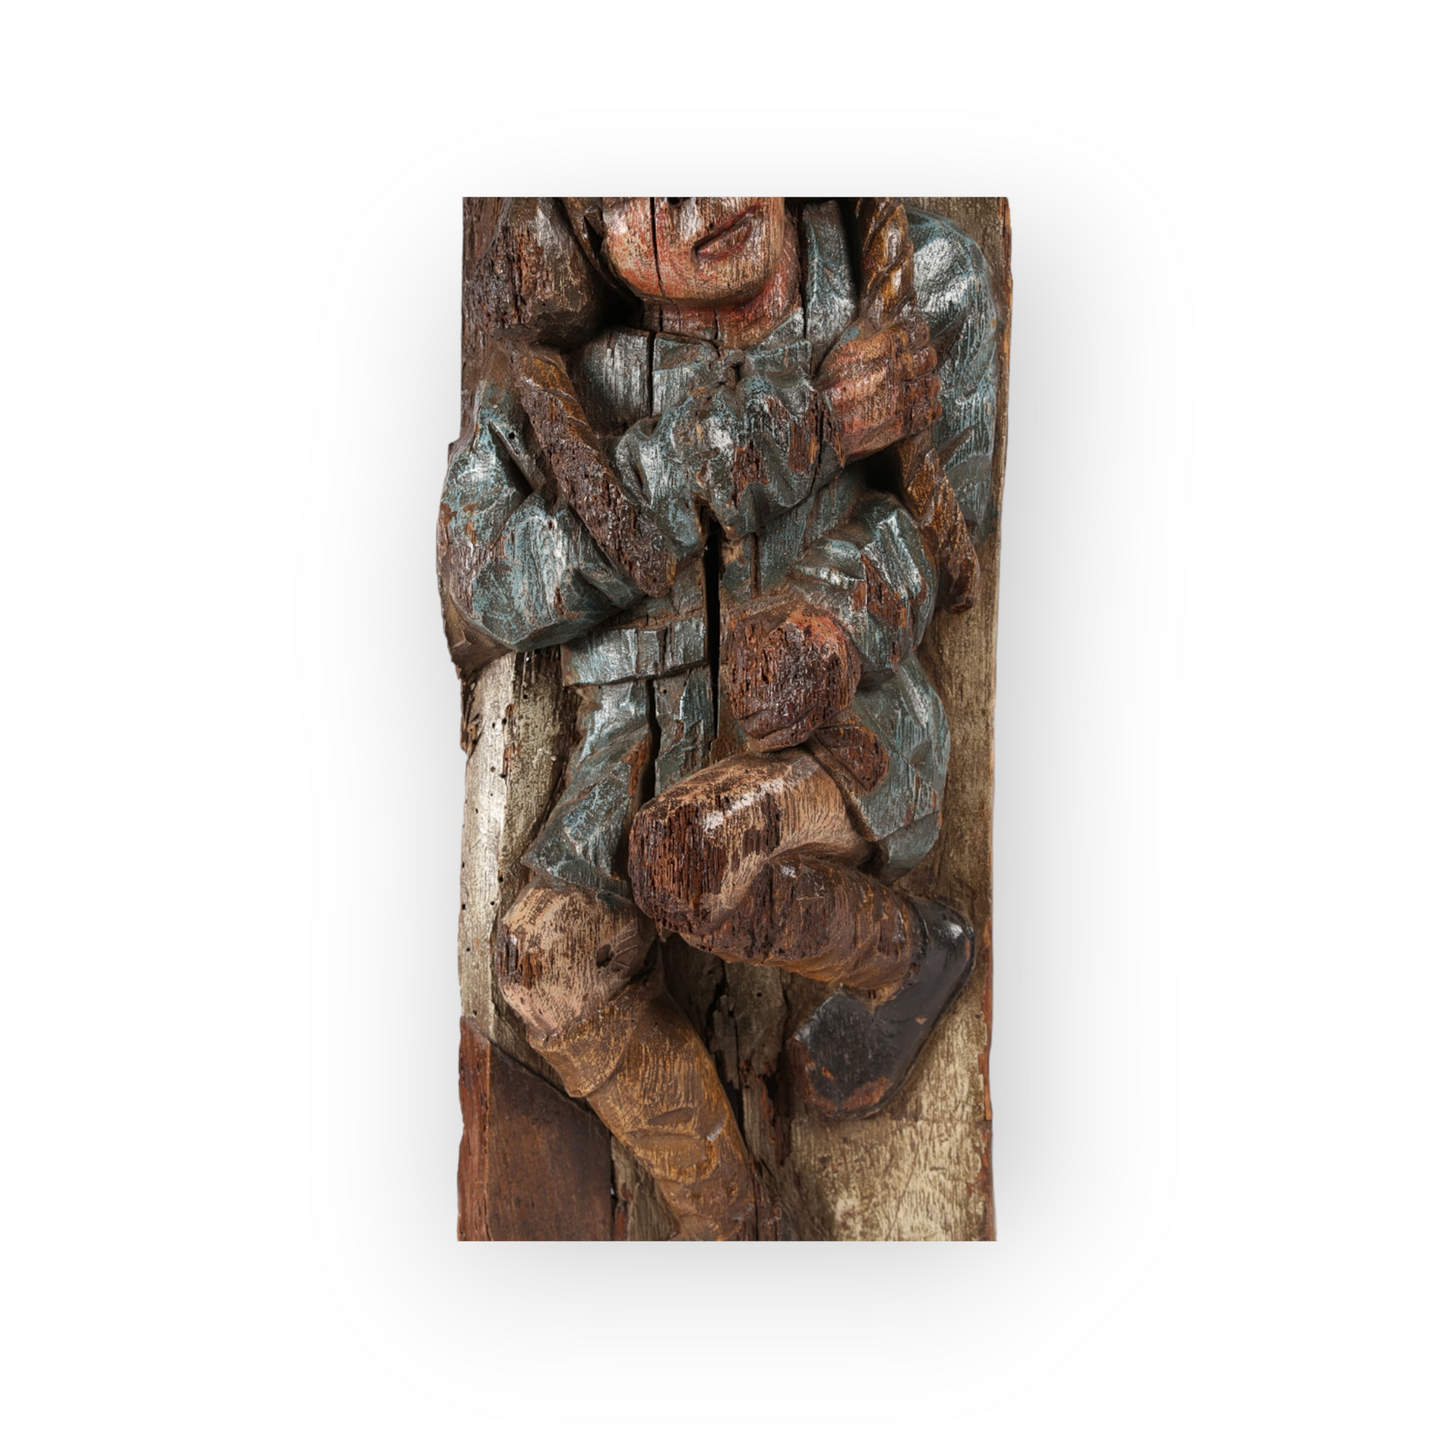 A Large & Rare 15th Century Antique Carved Pine Panel Depicting a Bell Ringer, circa 1450-1480